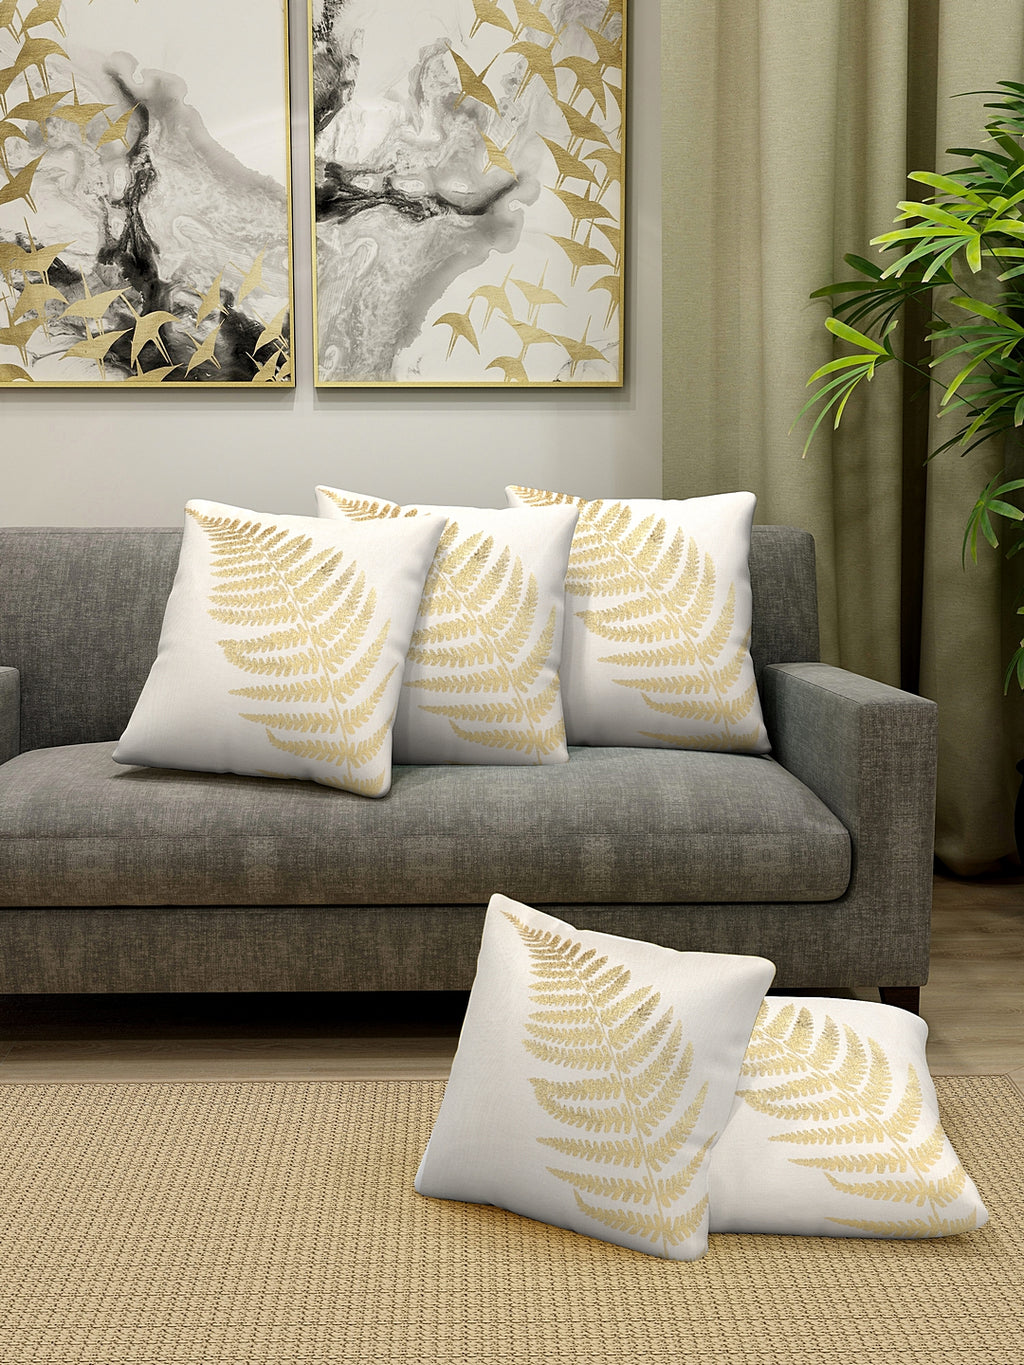 Detec™ Hosta Beige Golden Foil Printed 16 x 16 inches Cushion Cover (Set of 5 )